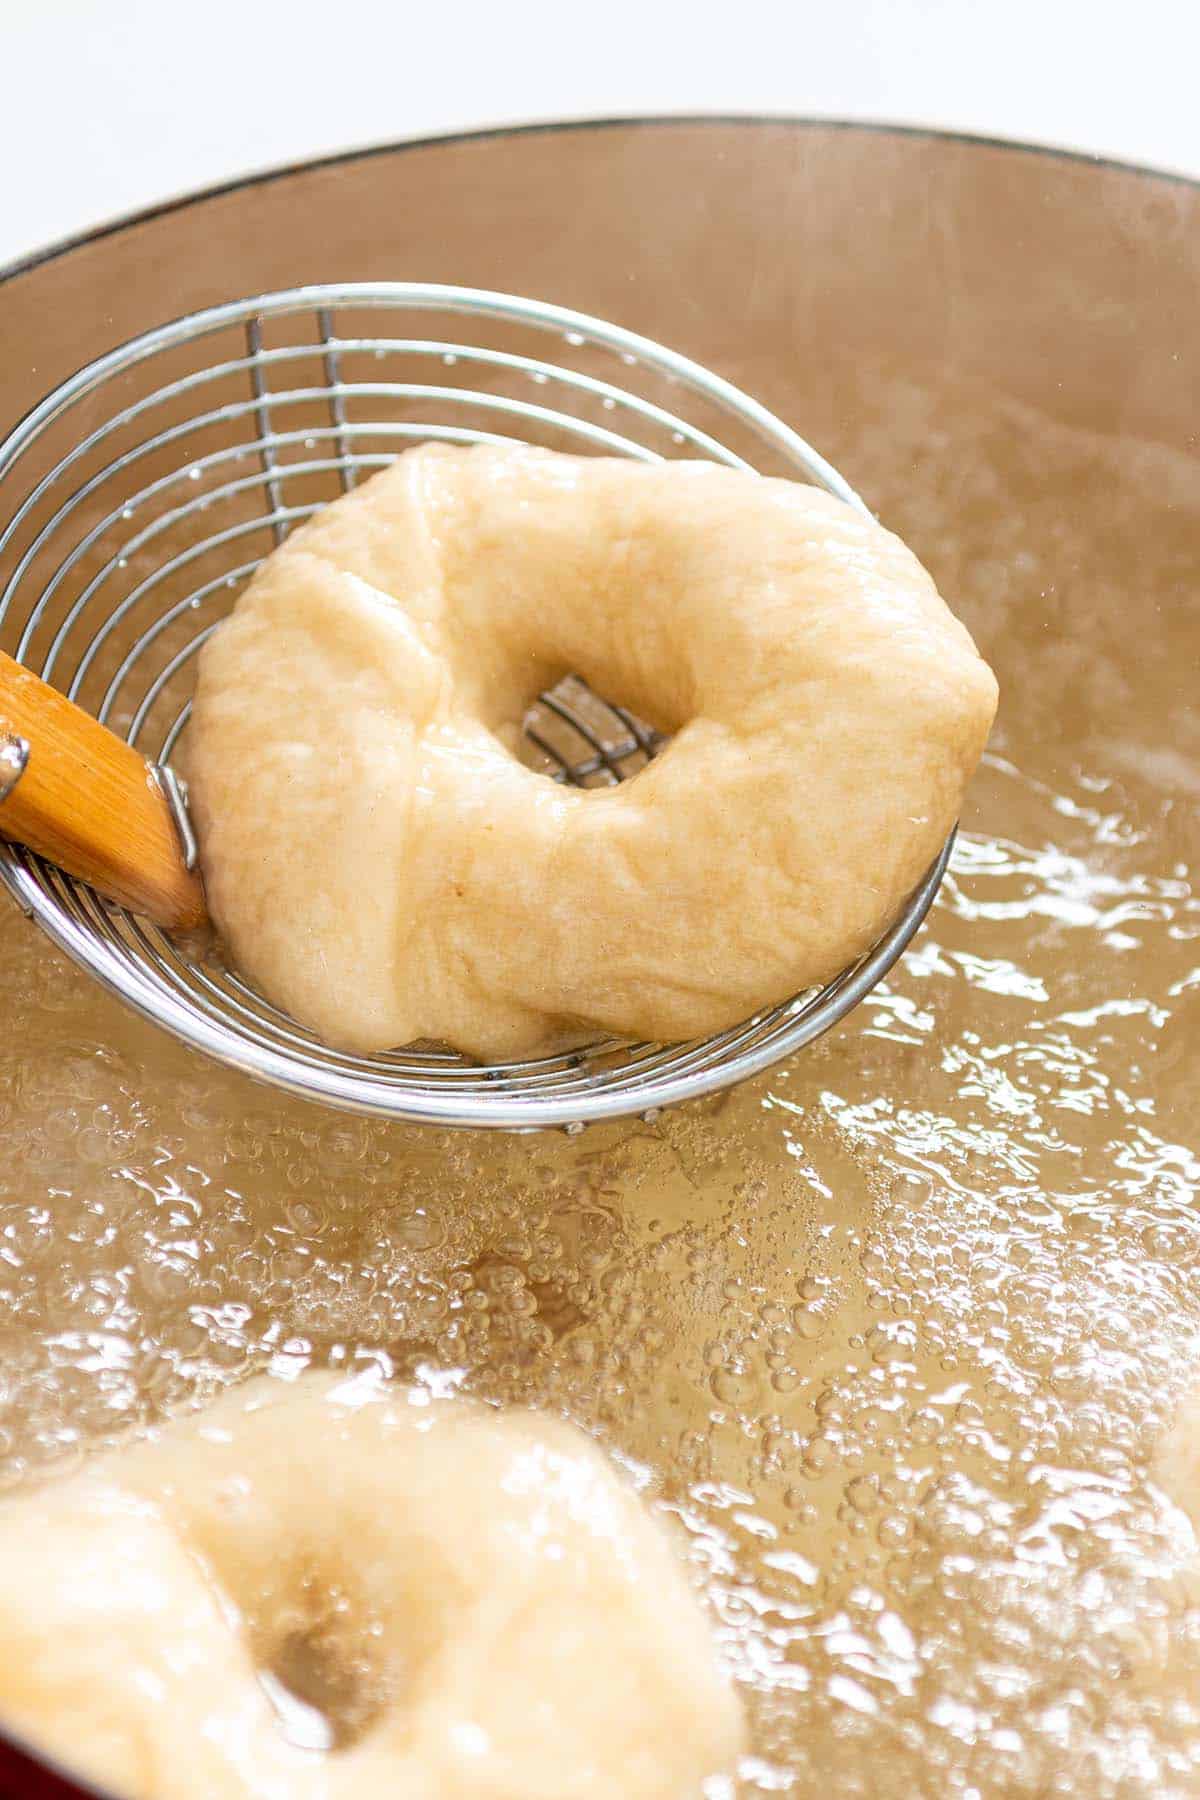 A skimmer scooping out a bagel from boiling water.